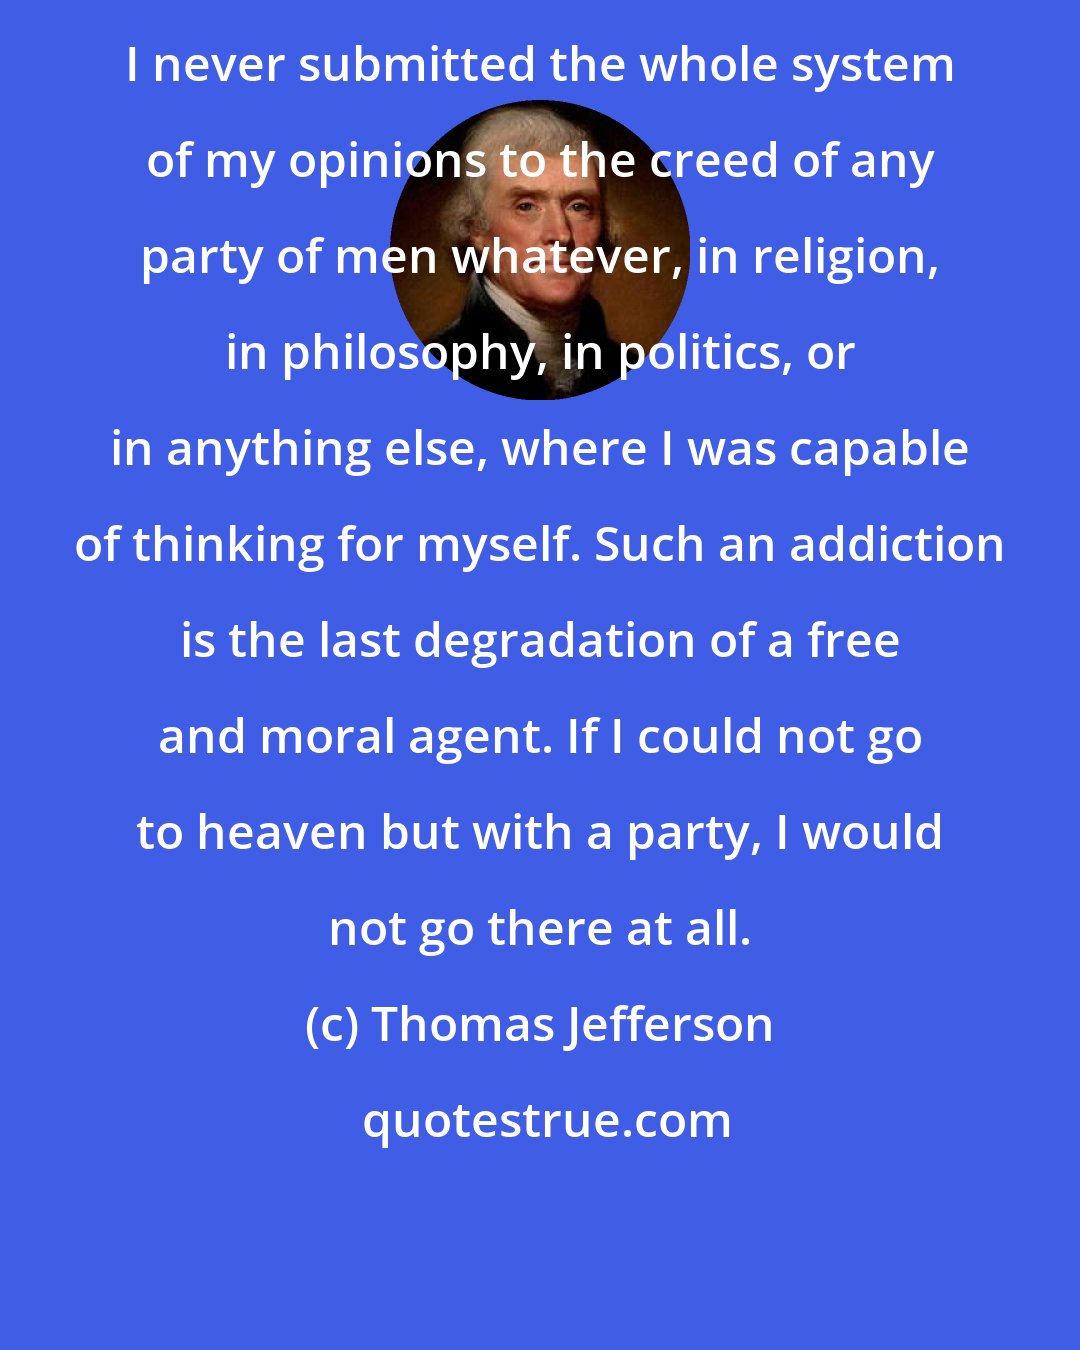 Thomas Jefferson: I never submitted the whole system of my opinions to the creed of any party of men whatever, in religion, in philosophy, in politics, or in anything else, where I was capable of thinking for myself. Such an addiction is the last degradation of a free and moral agent. If I could not go to heaven but with a party, I would not go there at all.